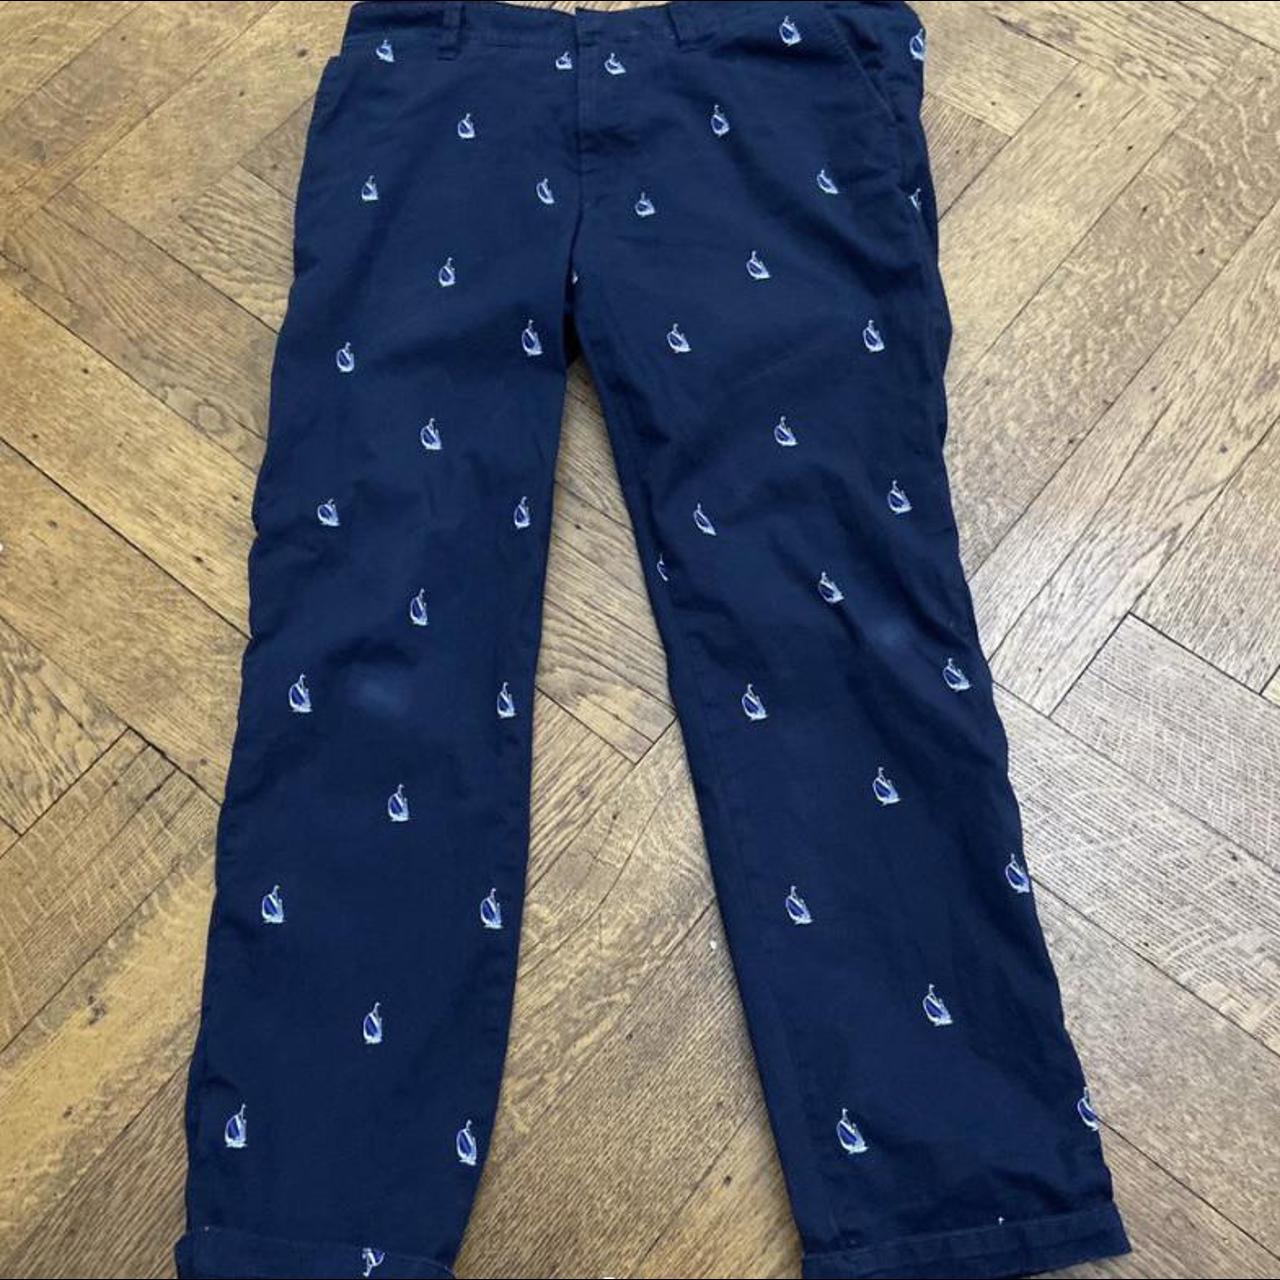 Product Image 1 - Nautica yacht print navy trousers.